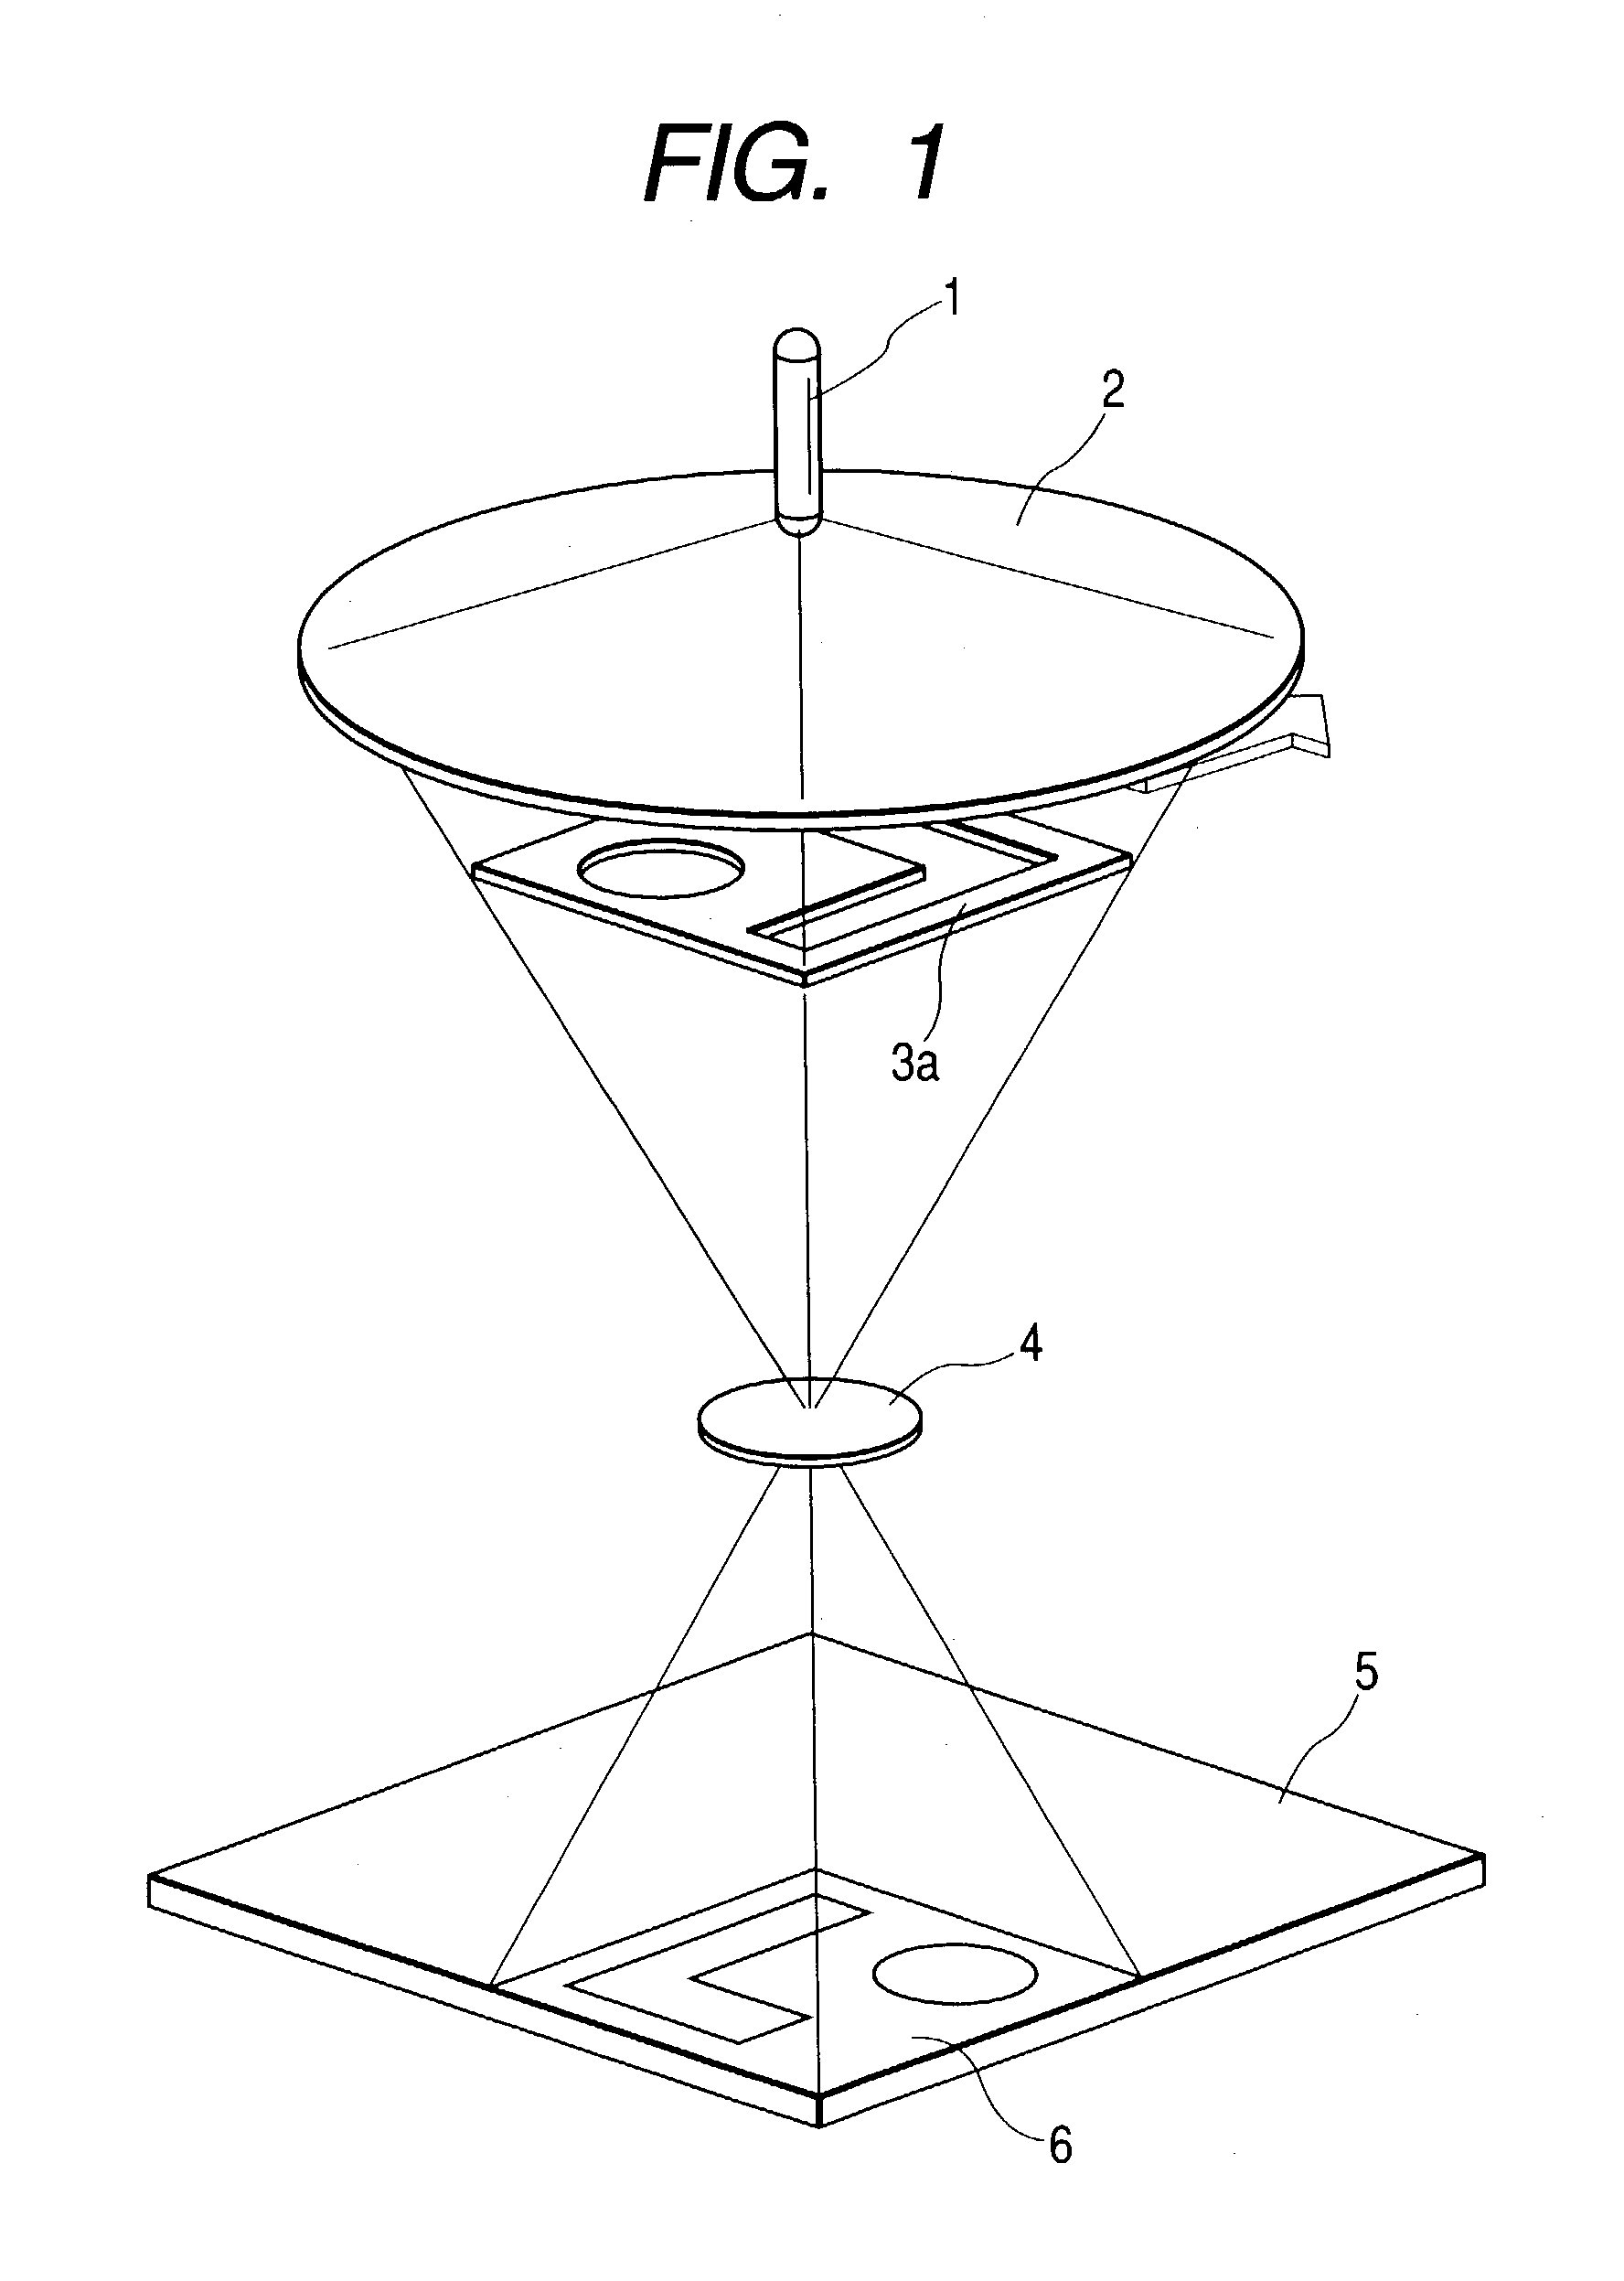 Three-dimensional stereolithographic apparatus